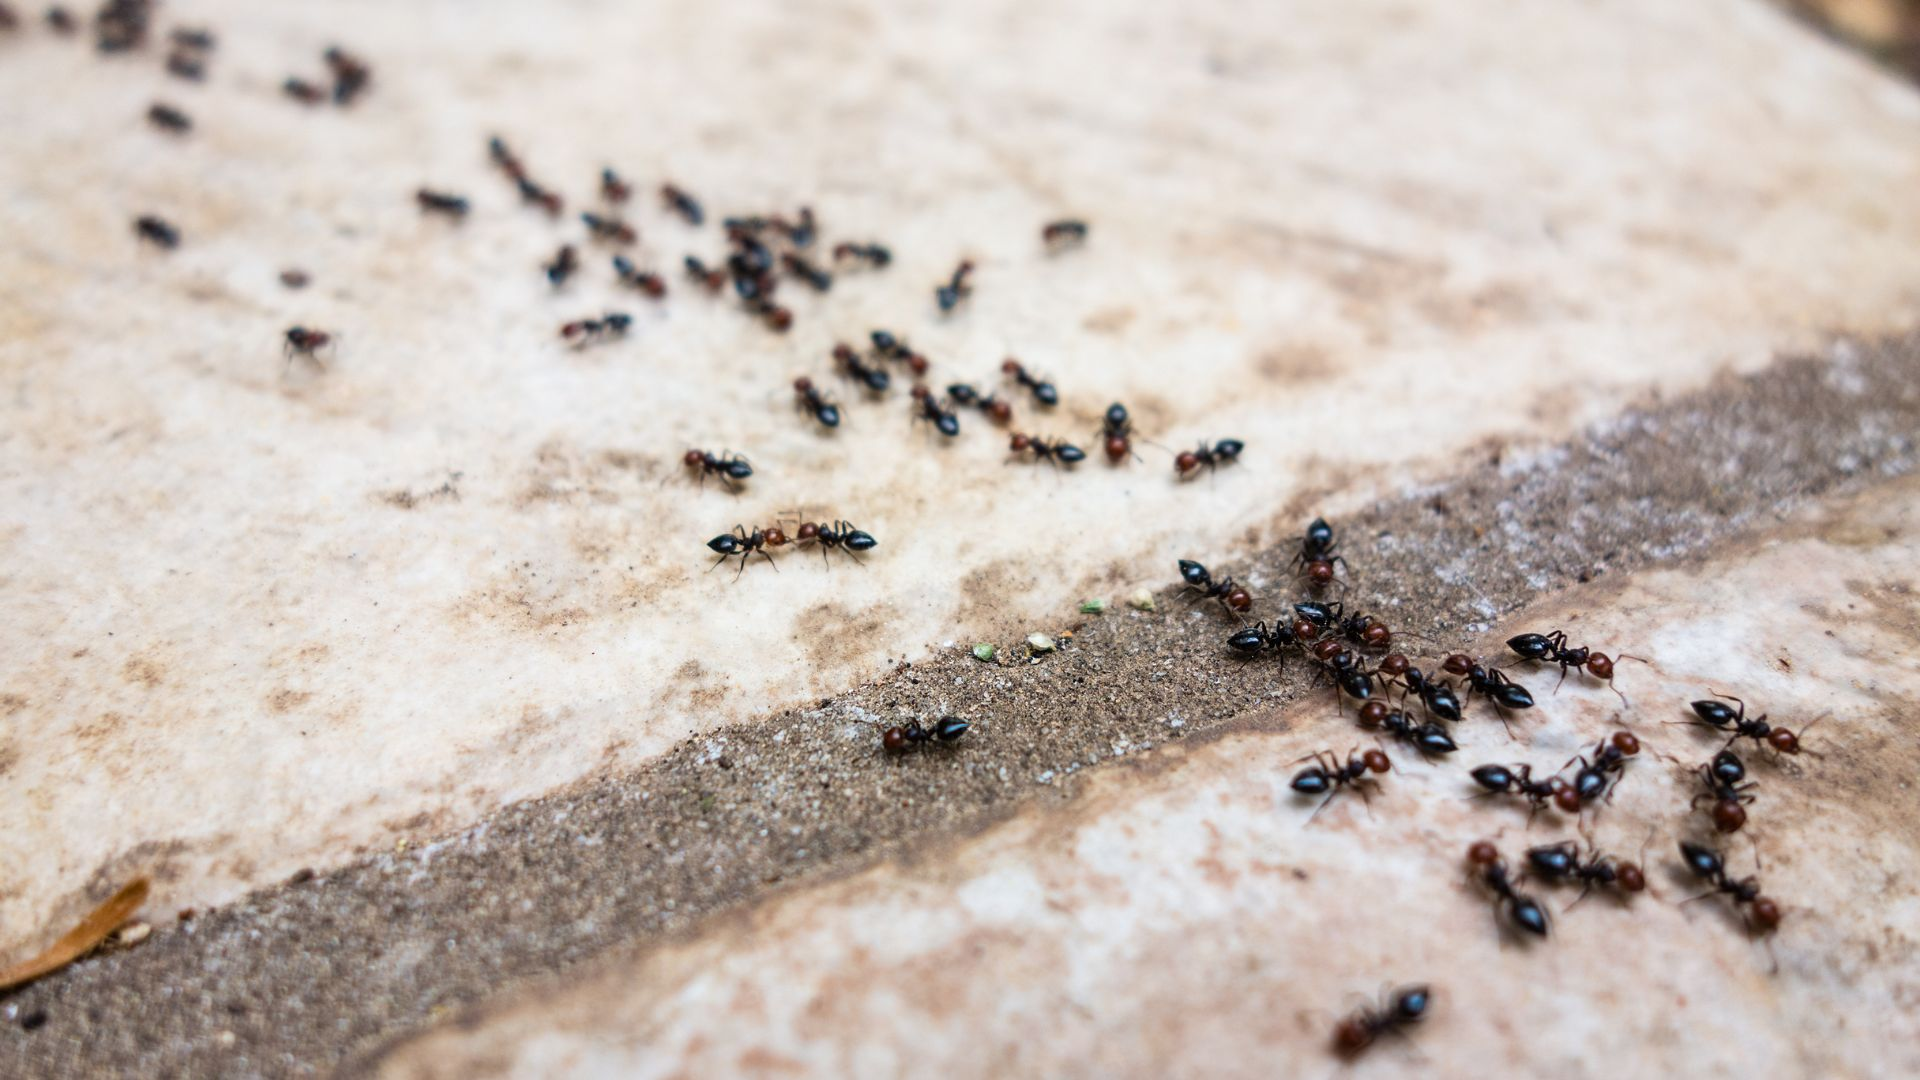 An image of an ant pheremone trail.